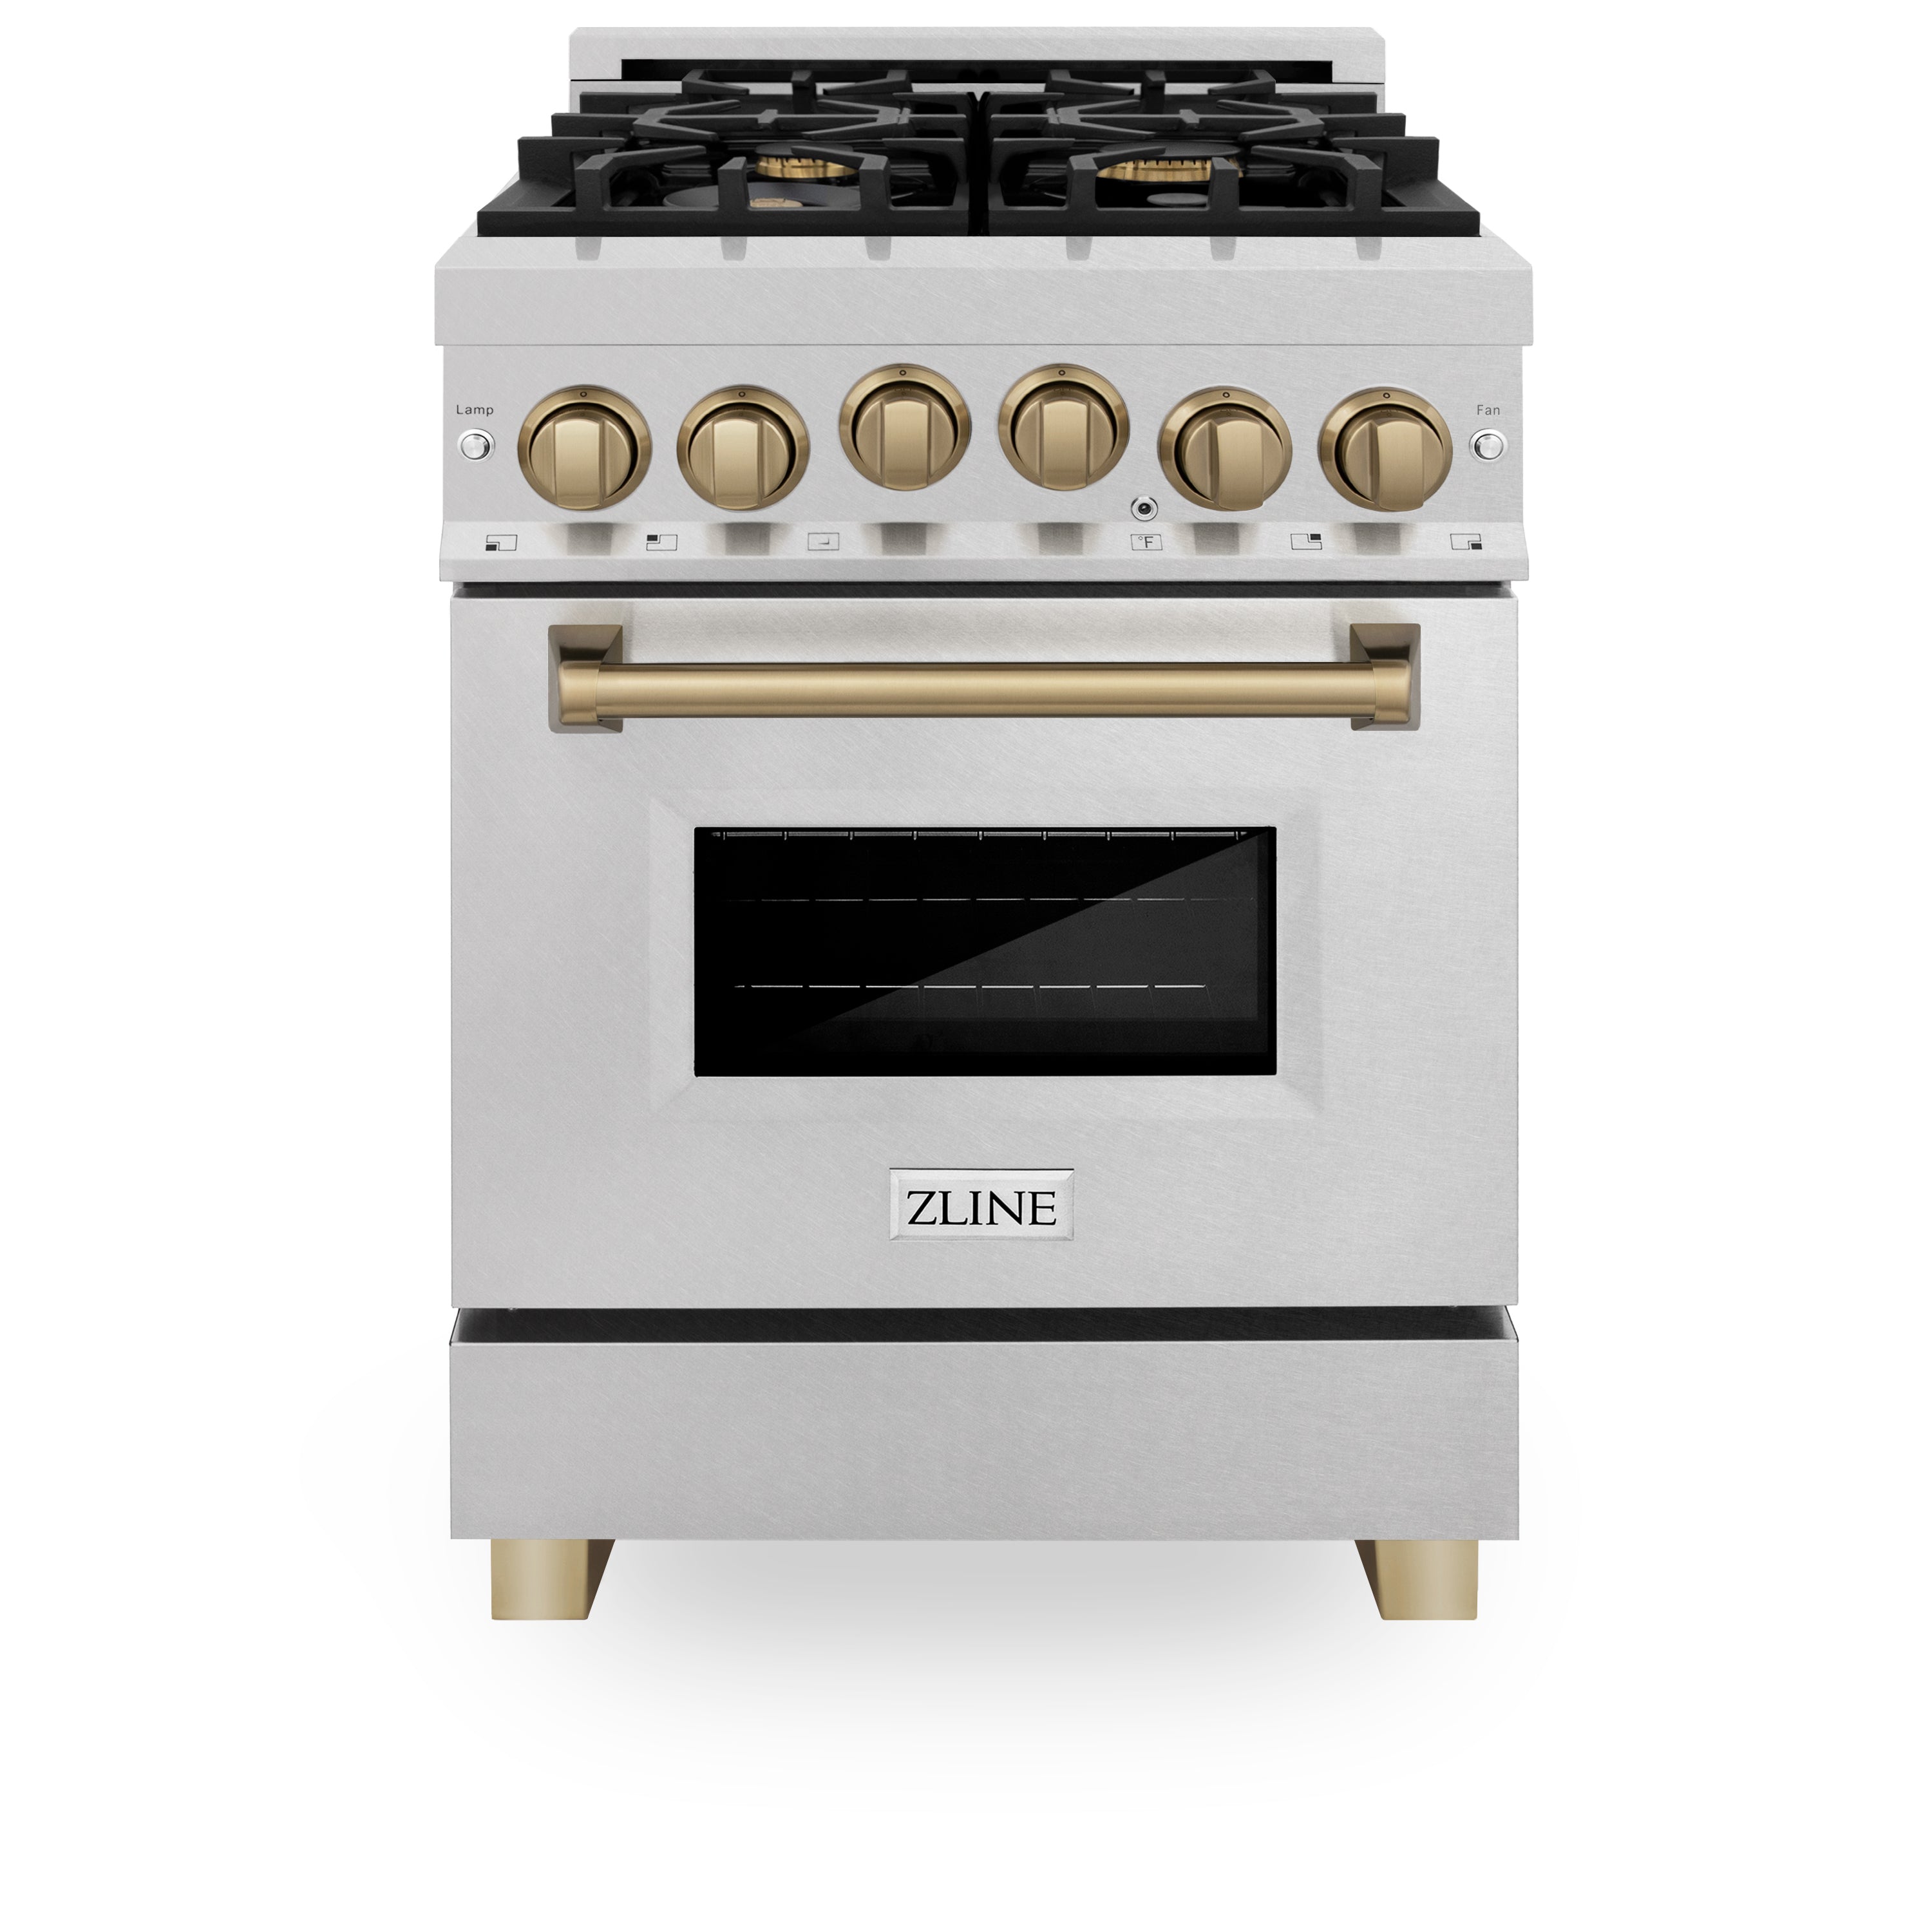 ZLINE Autograph Edition 24" 2.8 cu. ft. Range with Gas Stove and Gas Oven in Fingerprint Resistant Stainless Steel with Champagne Bronze Accents (RGSZ-SN-24-CB)